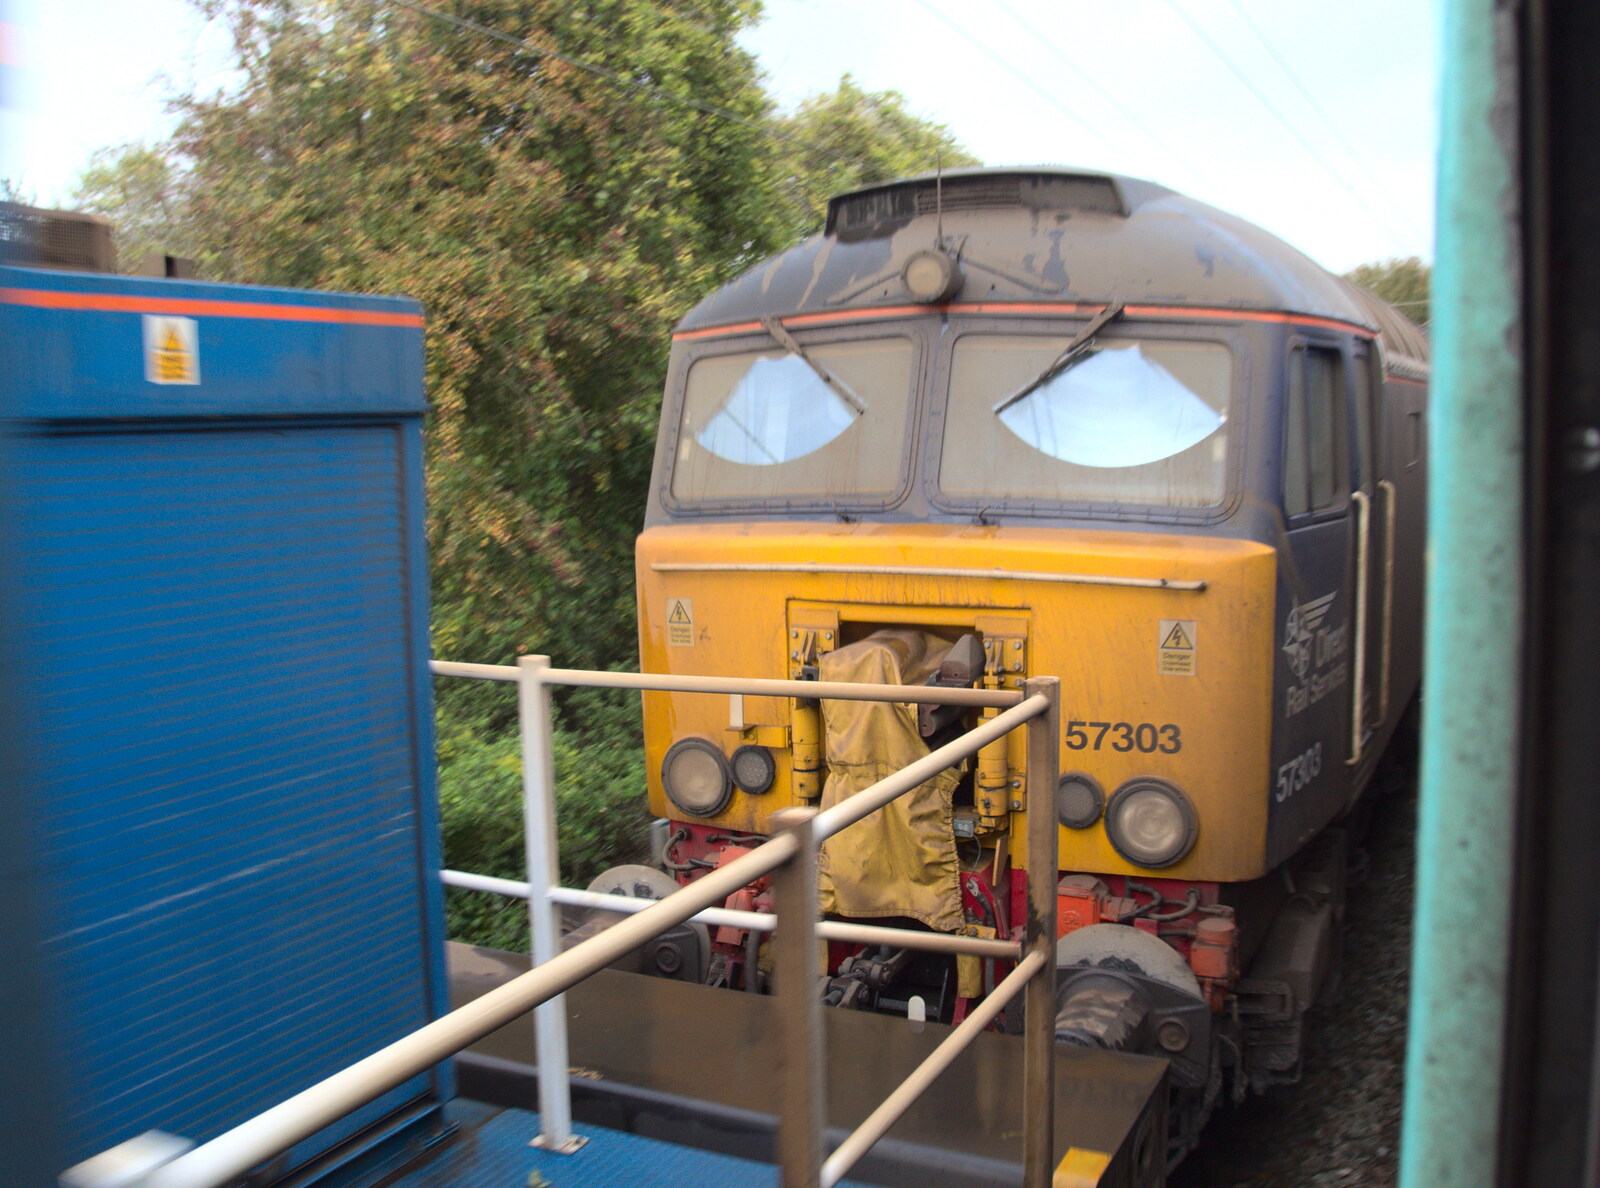 57303 could do with a bit of a clean from (Very) Long Train (Not) Running, Stowmarket, Suffolk - 21st October 2014